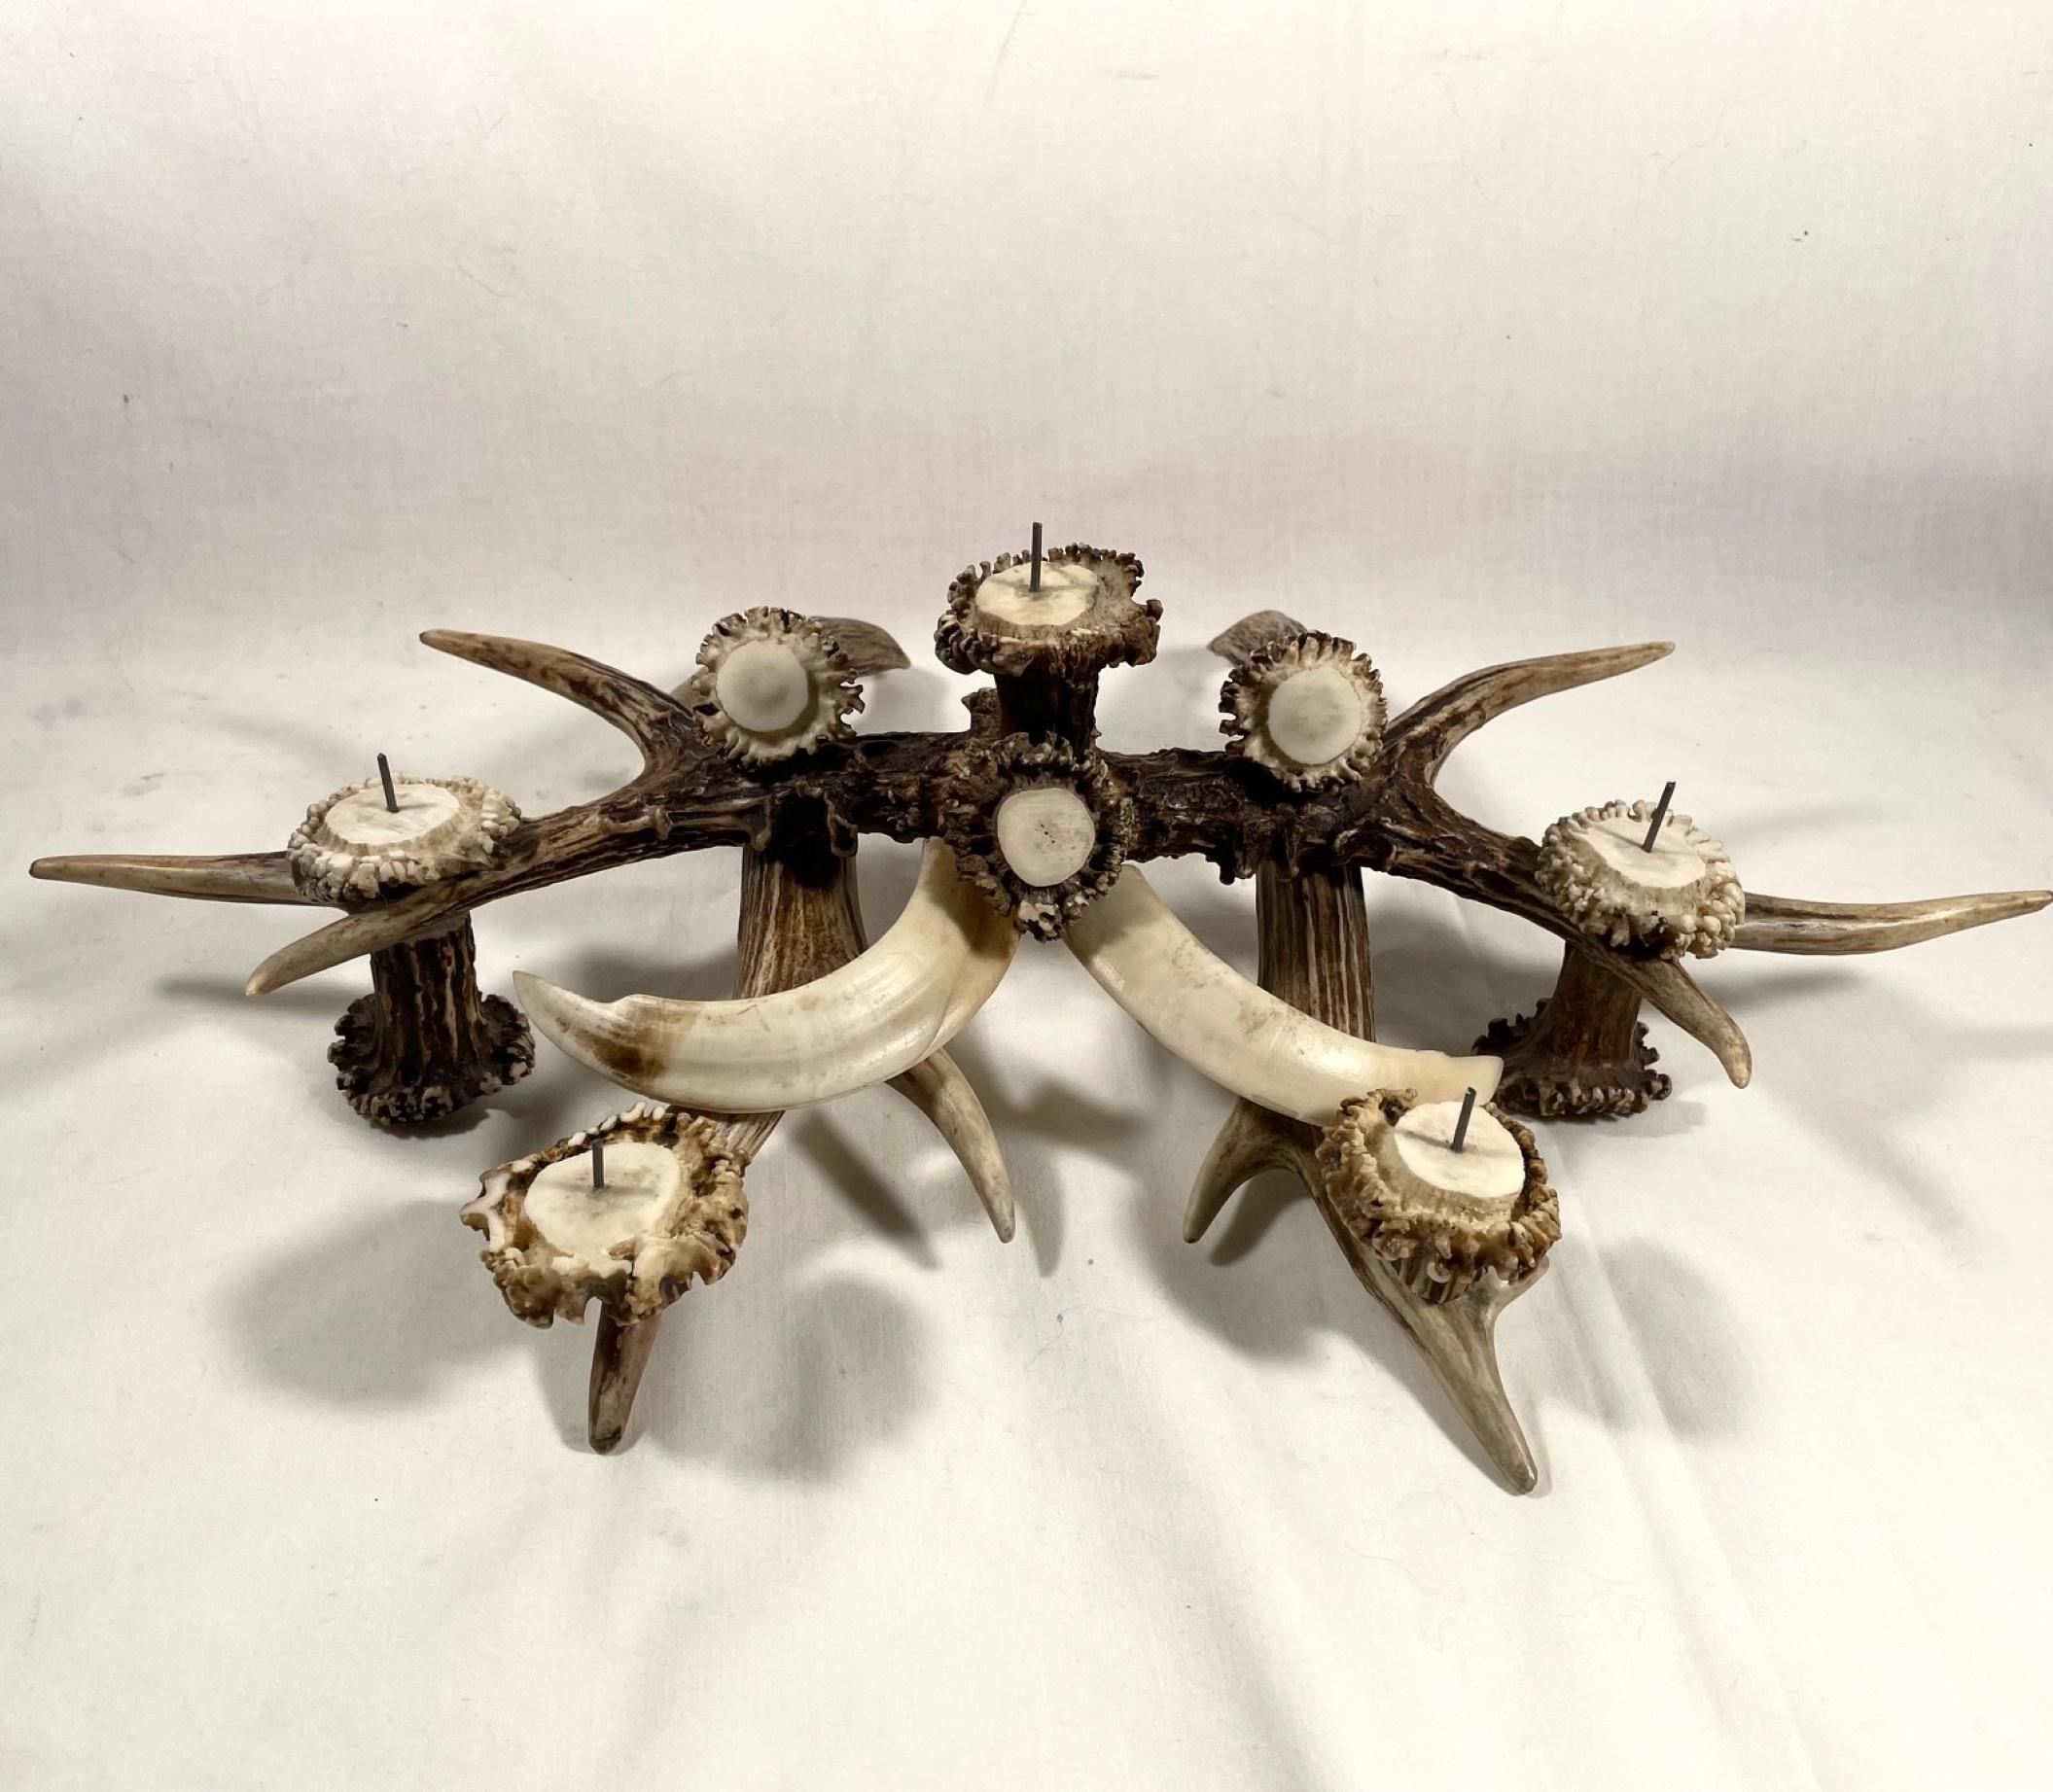 Antler and boar tusks candle holder centerpiece

This antique centerpiece candle holder is made of genuine deer antlers and Boar Tusks. It holds 5 candles. Cleverly mounted pieces result in a very decorative centerpiece ideal for a rustic